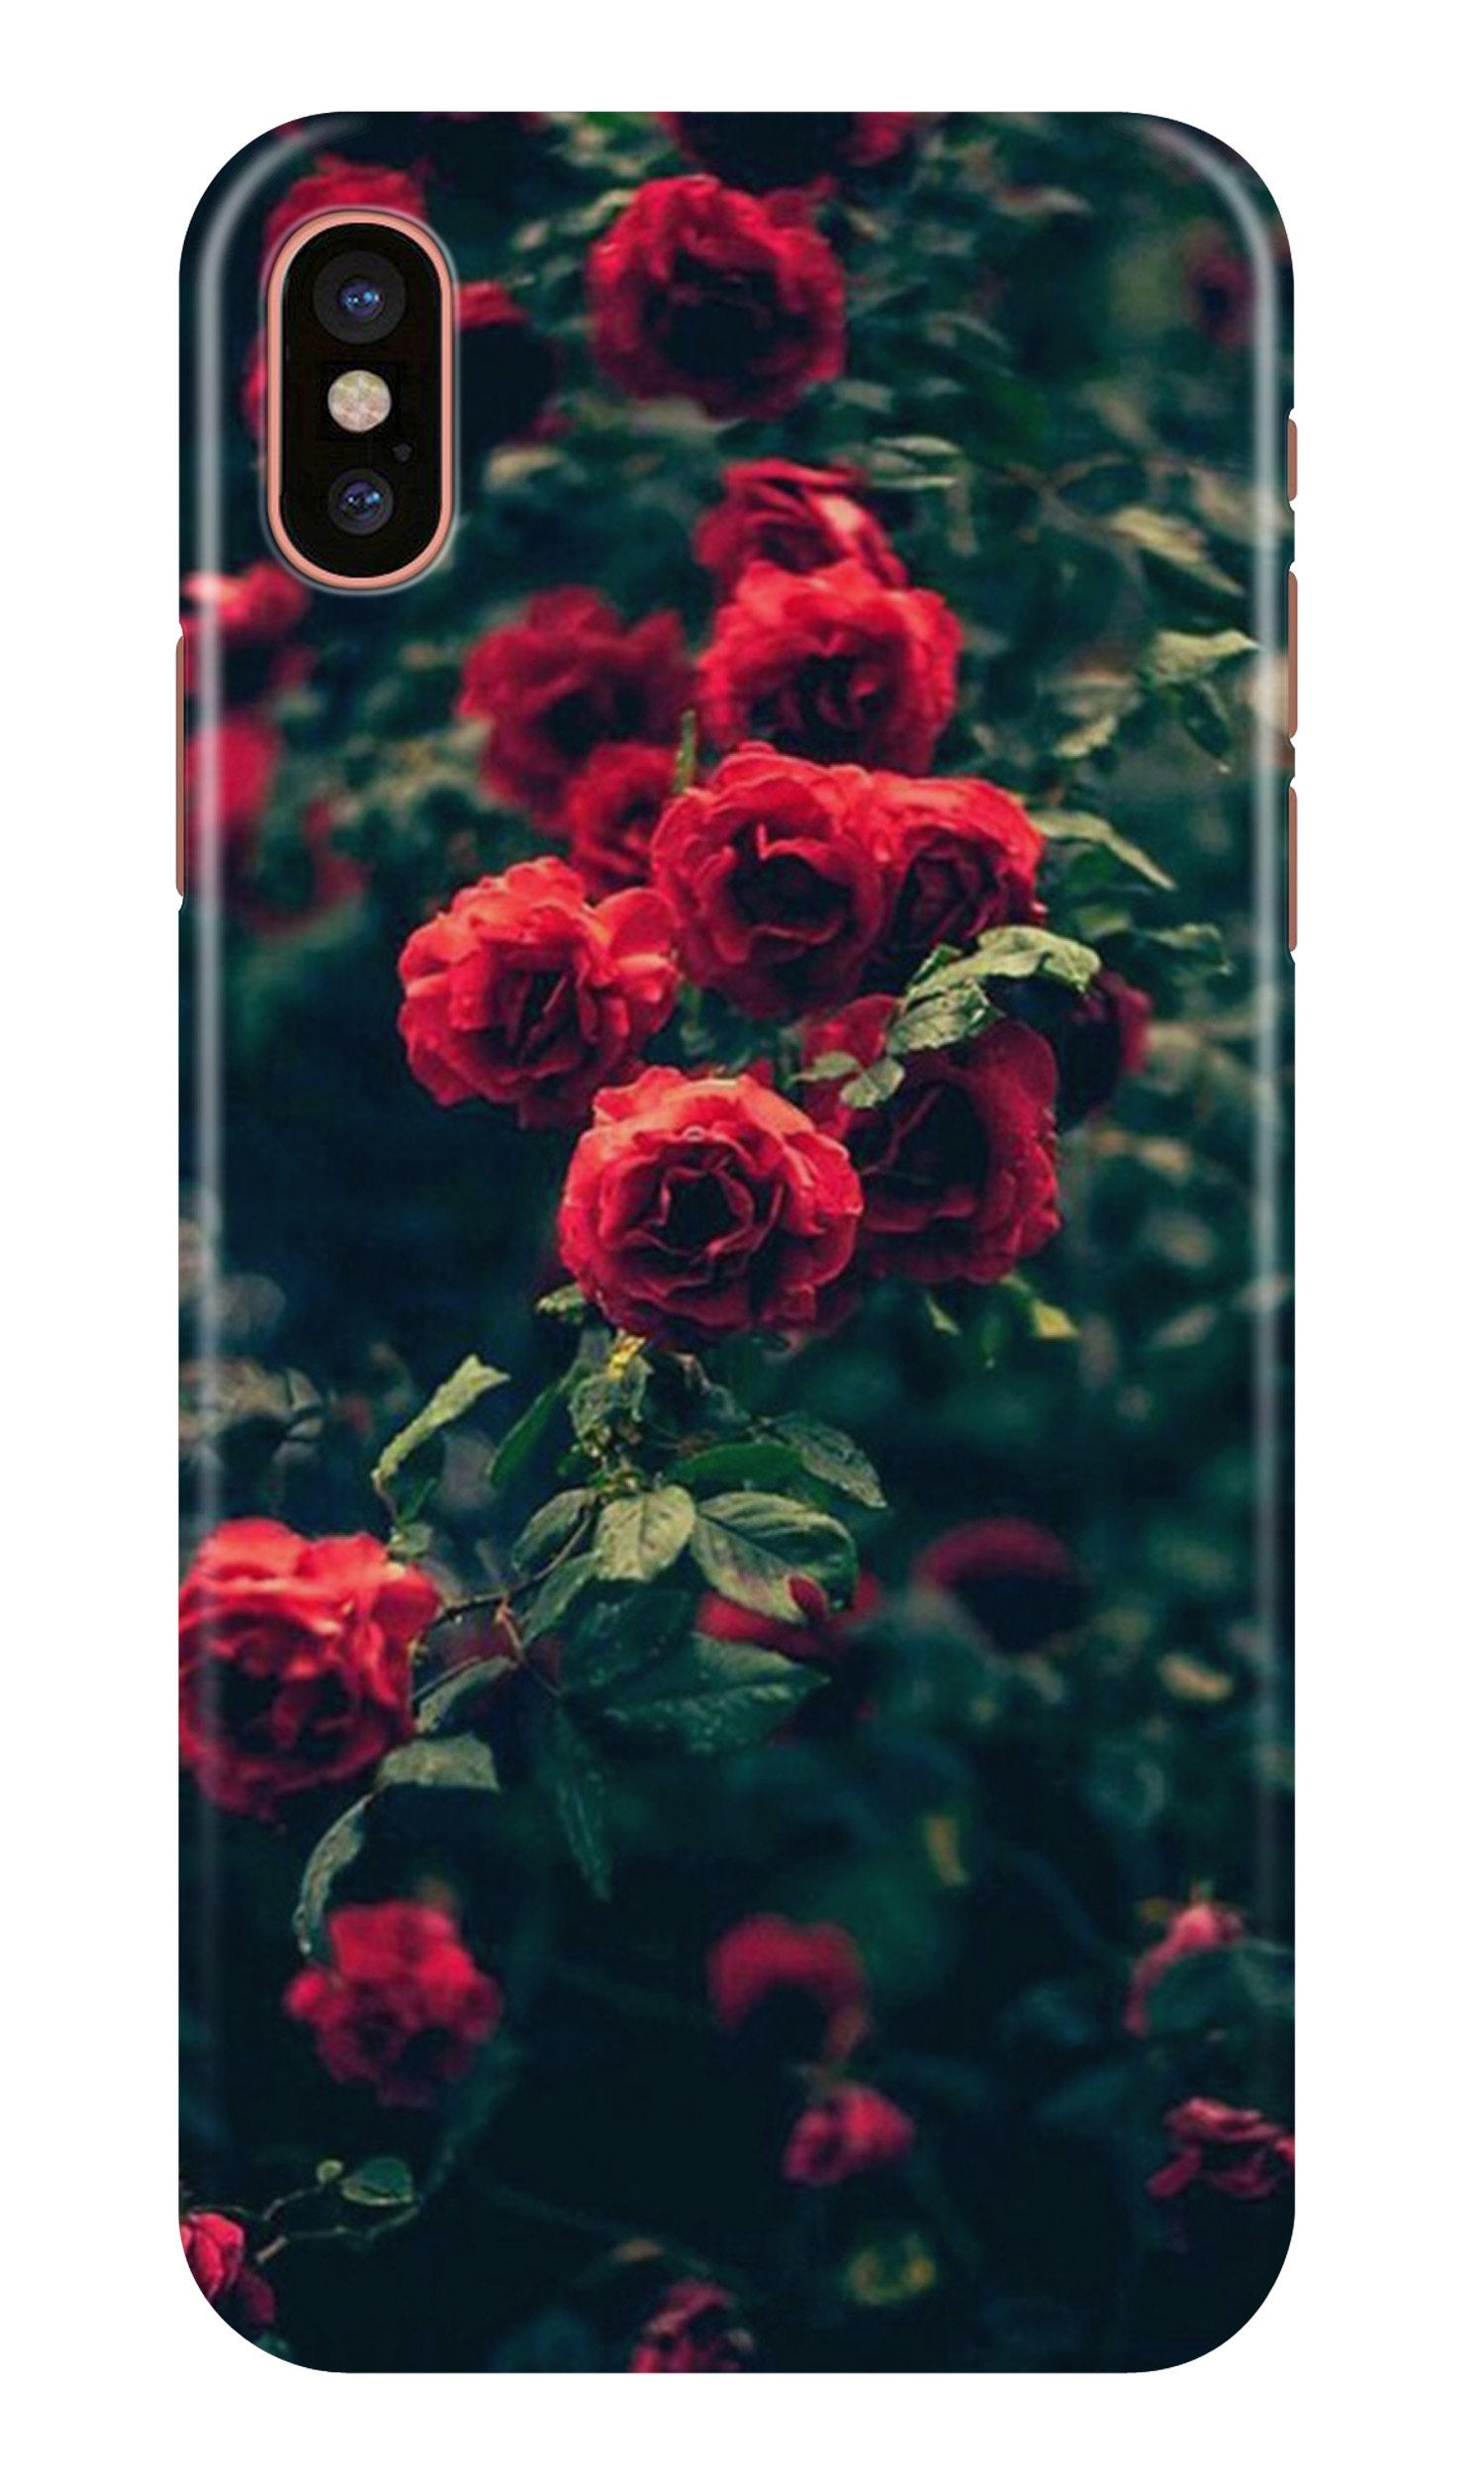 Red Rose Case for iPhone X